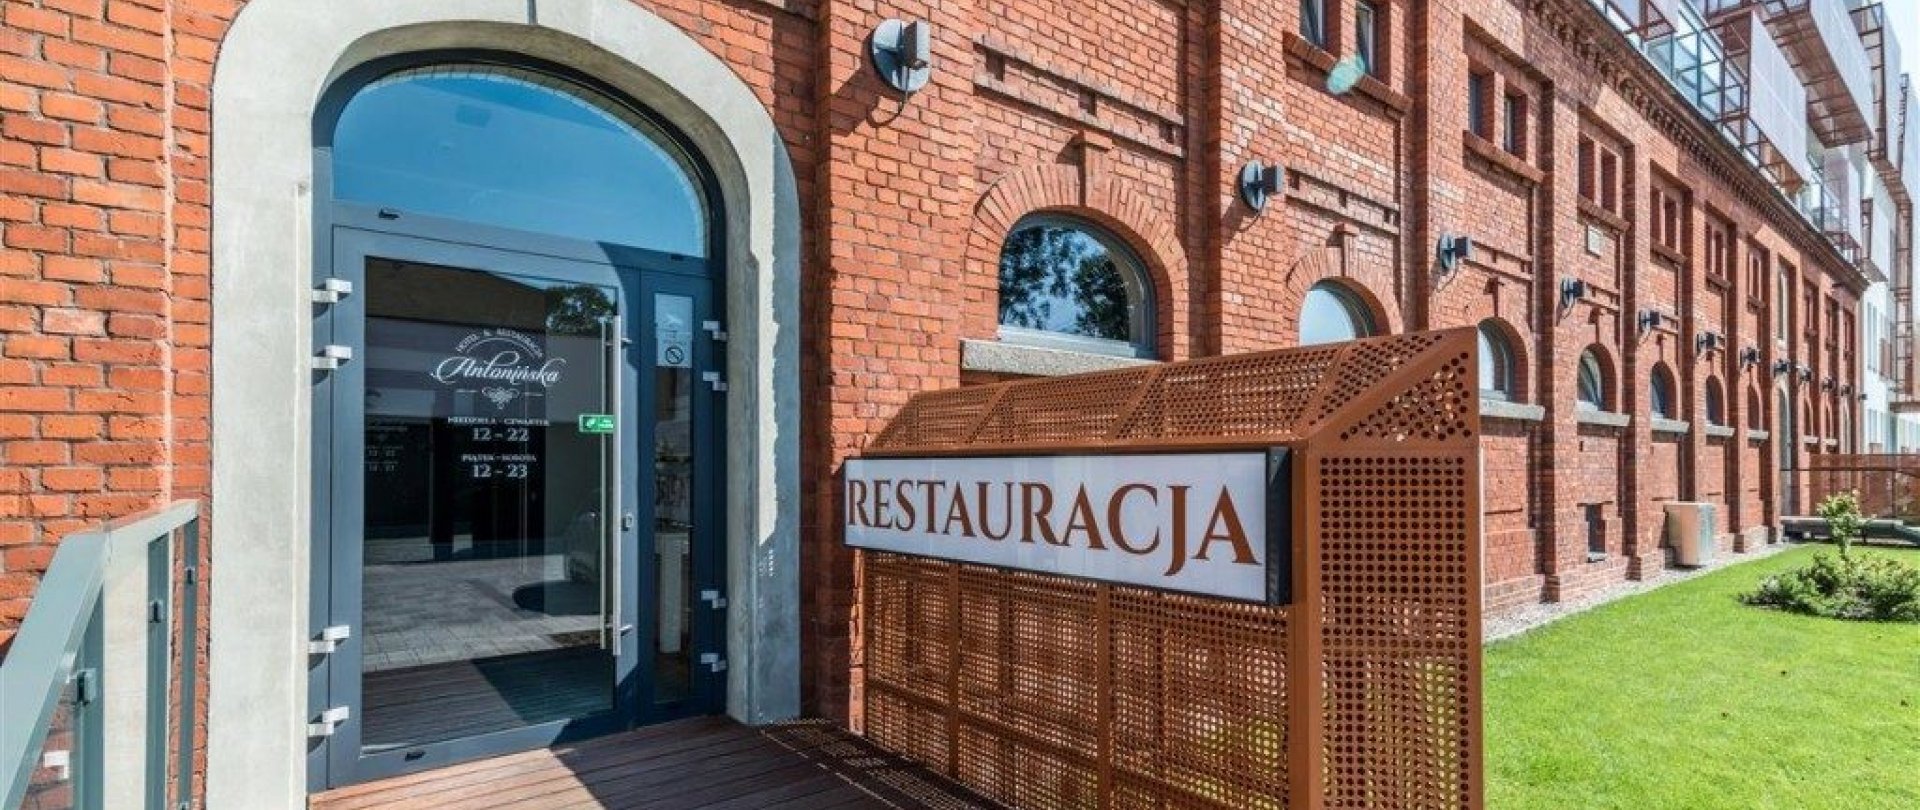 Hotel & Restauracja Antonińska supports Get to know your contractor action